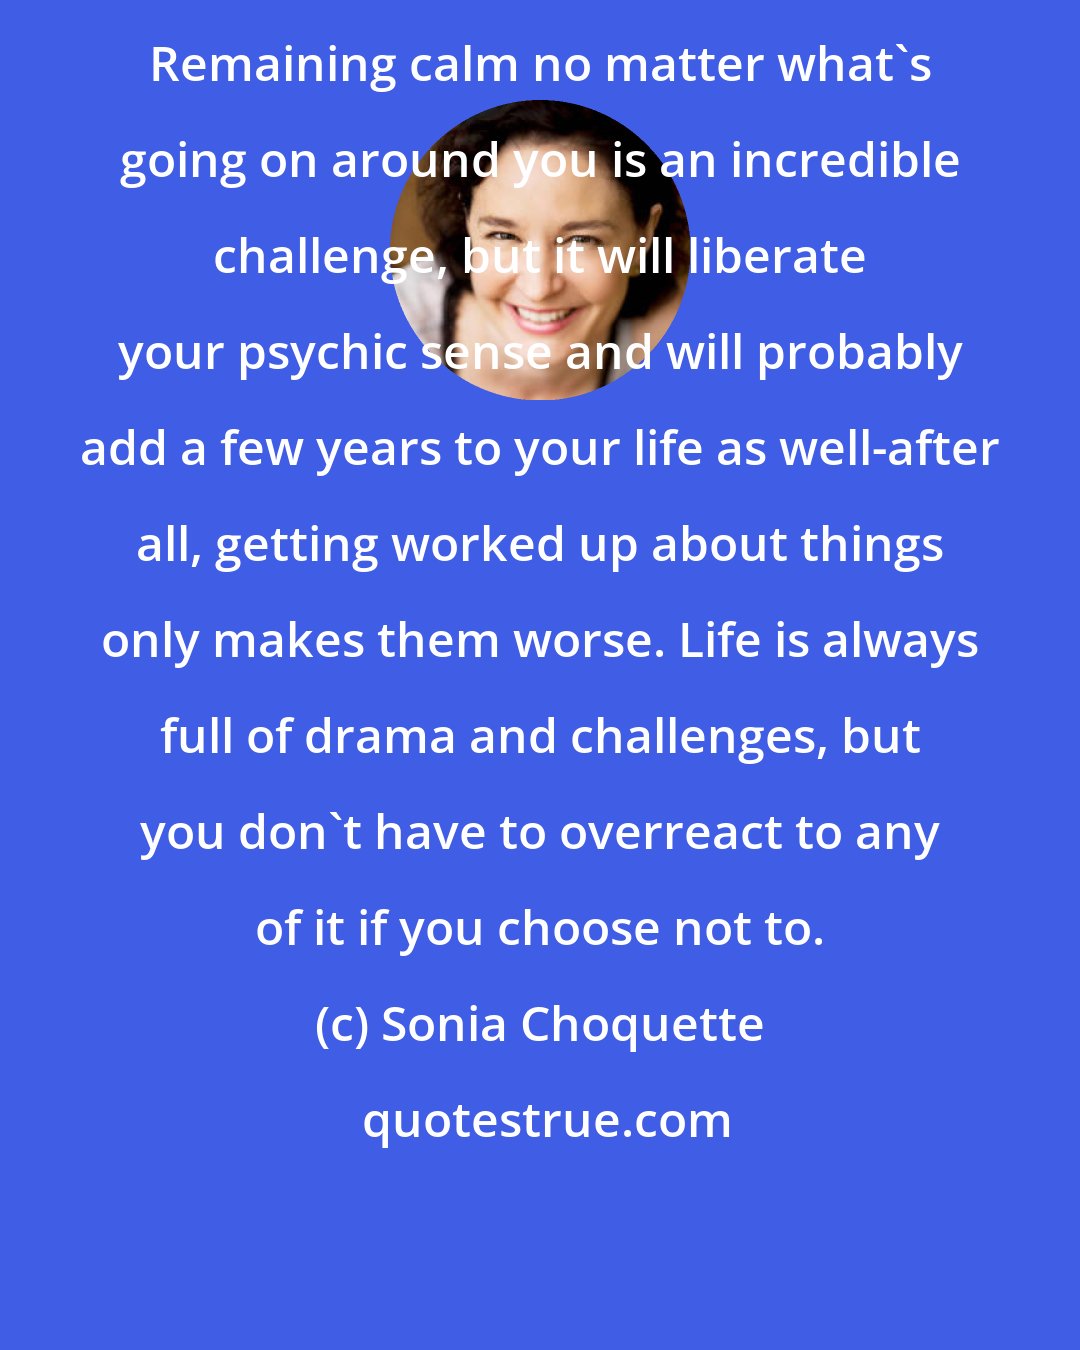 Sonia Choquette: Remaining calm no matter what's going on around you is an incredible challenge, but it will liberate your psychic sense and will probably add a few years to your life as well-after all, getting worked up about things only makes them worse. Life is always full of drama and challenges, but you don't have to overreact to any of it if you choose not to.